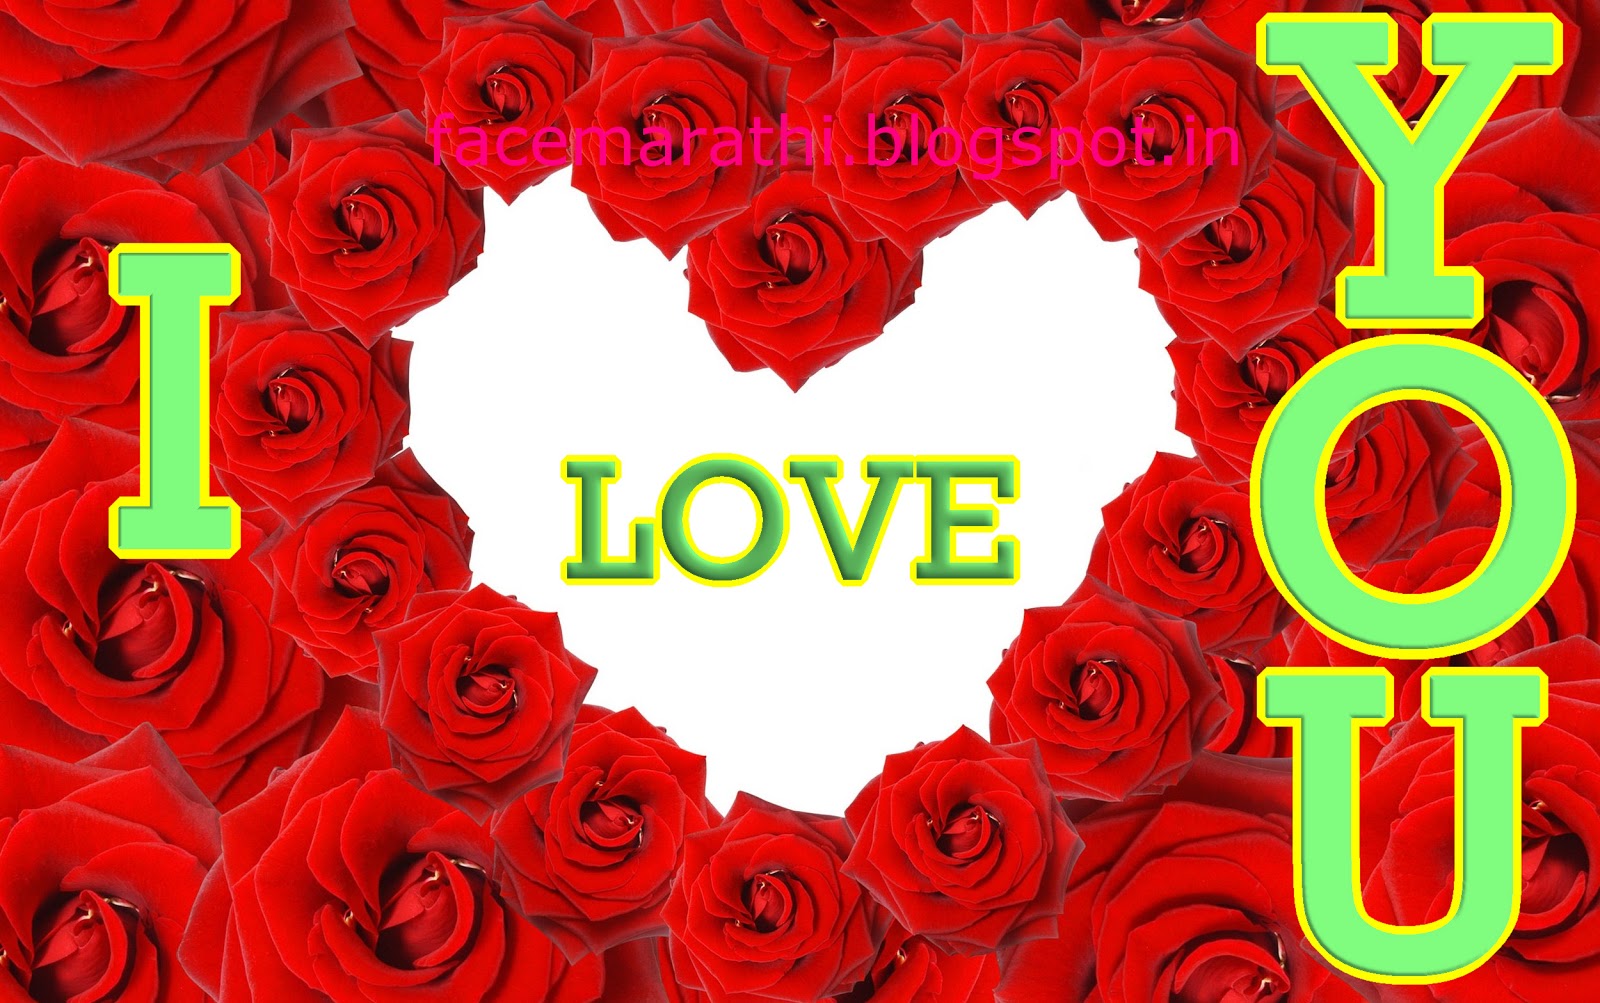 kavita name wallpaper,red,valentine's day,text,rose,heart